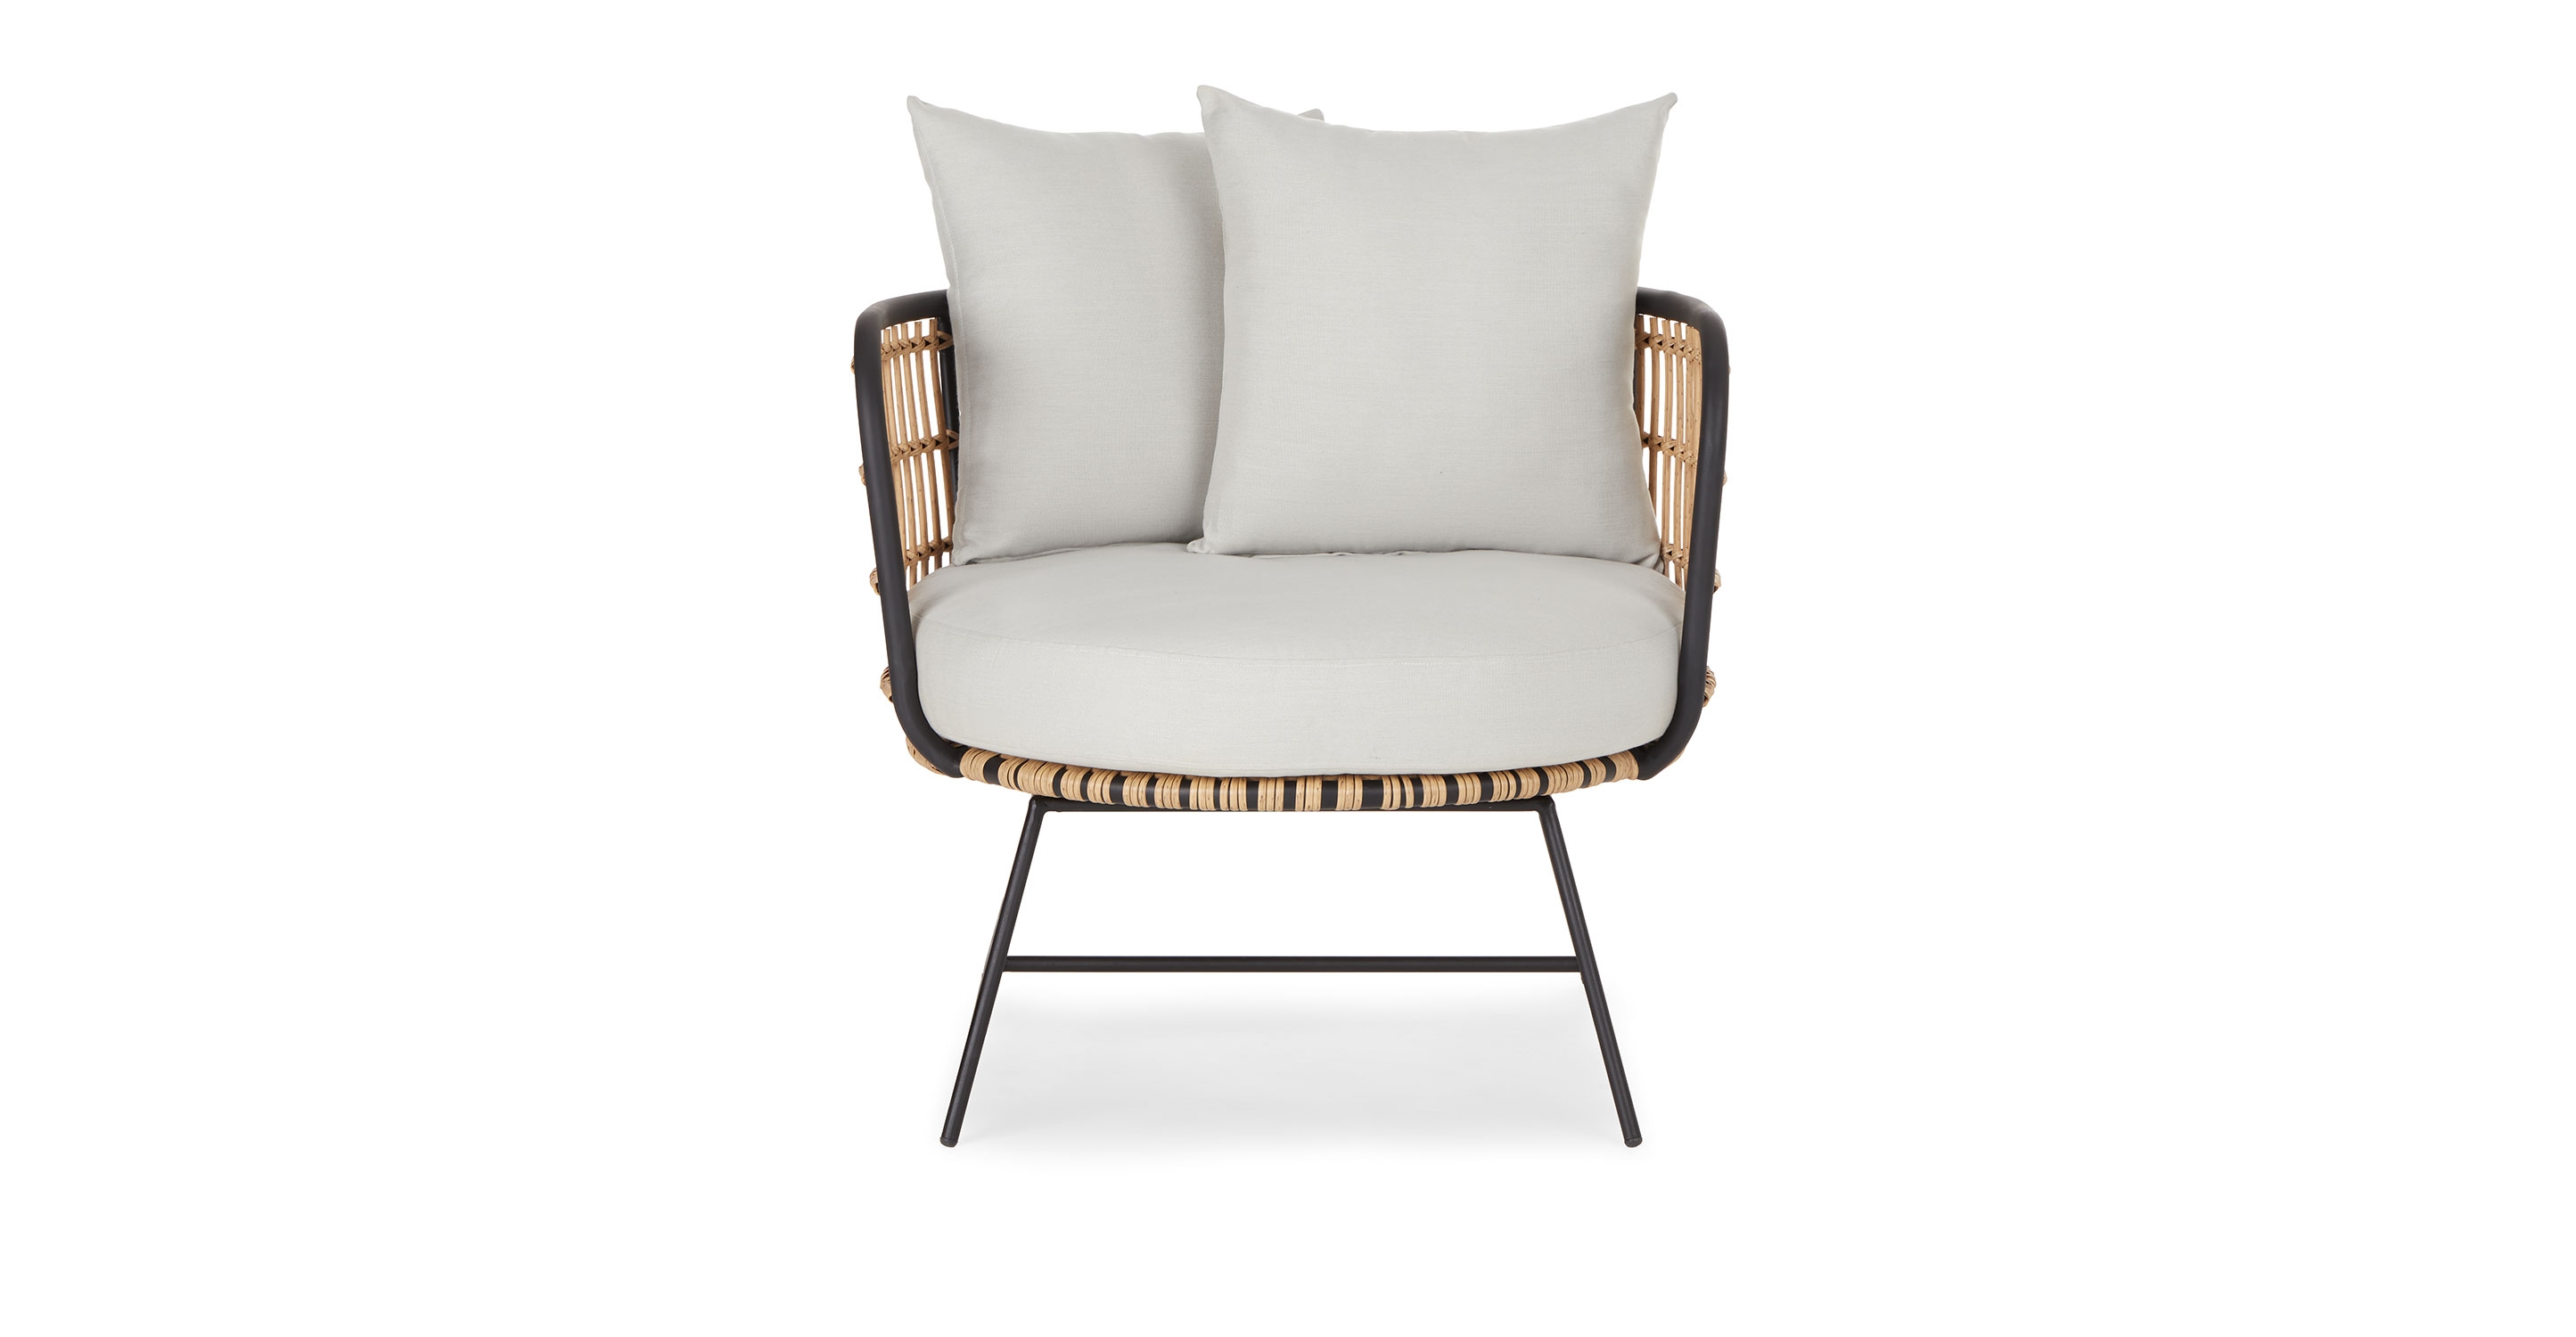 Onya Lily White Lounge Chair - Image 2